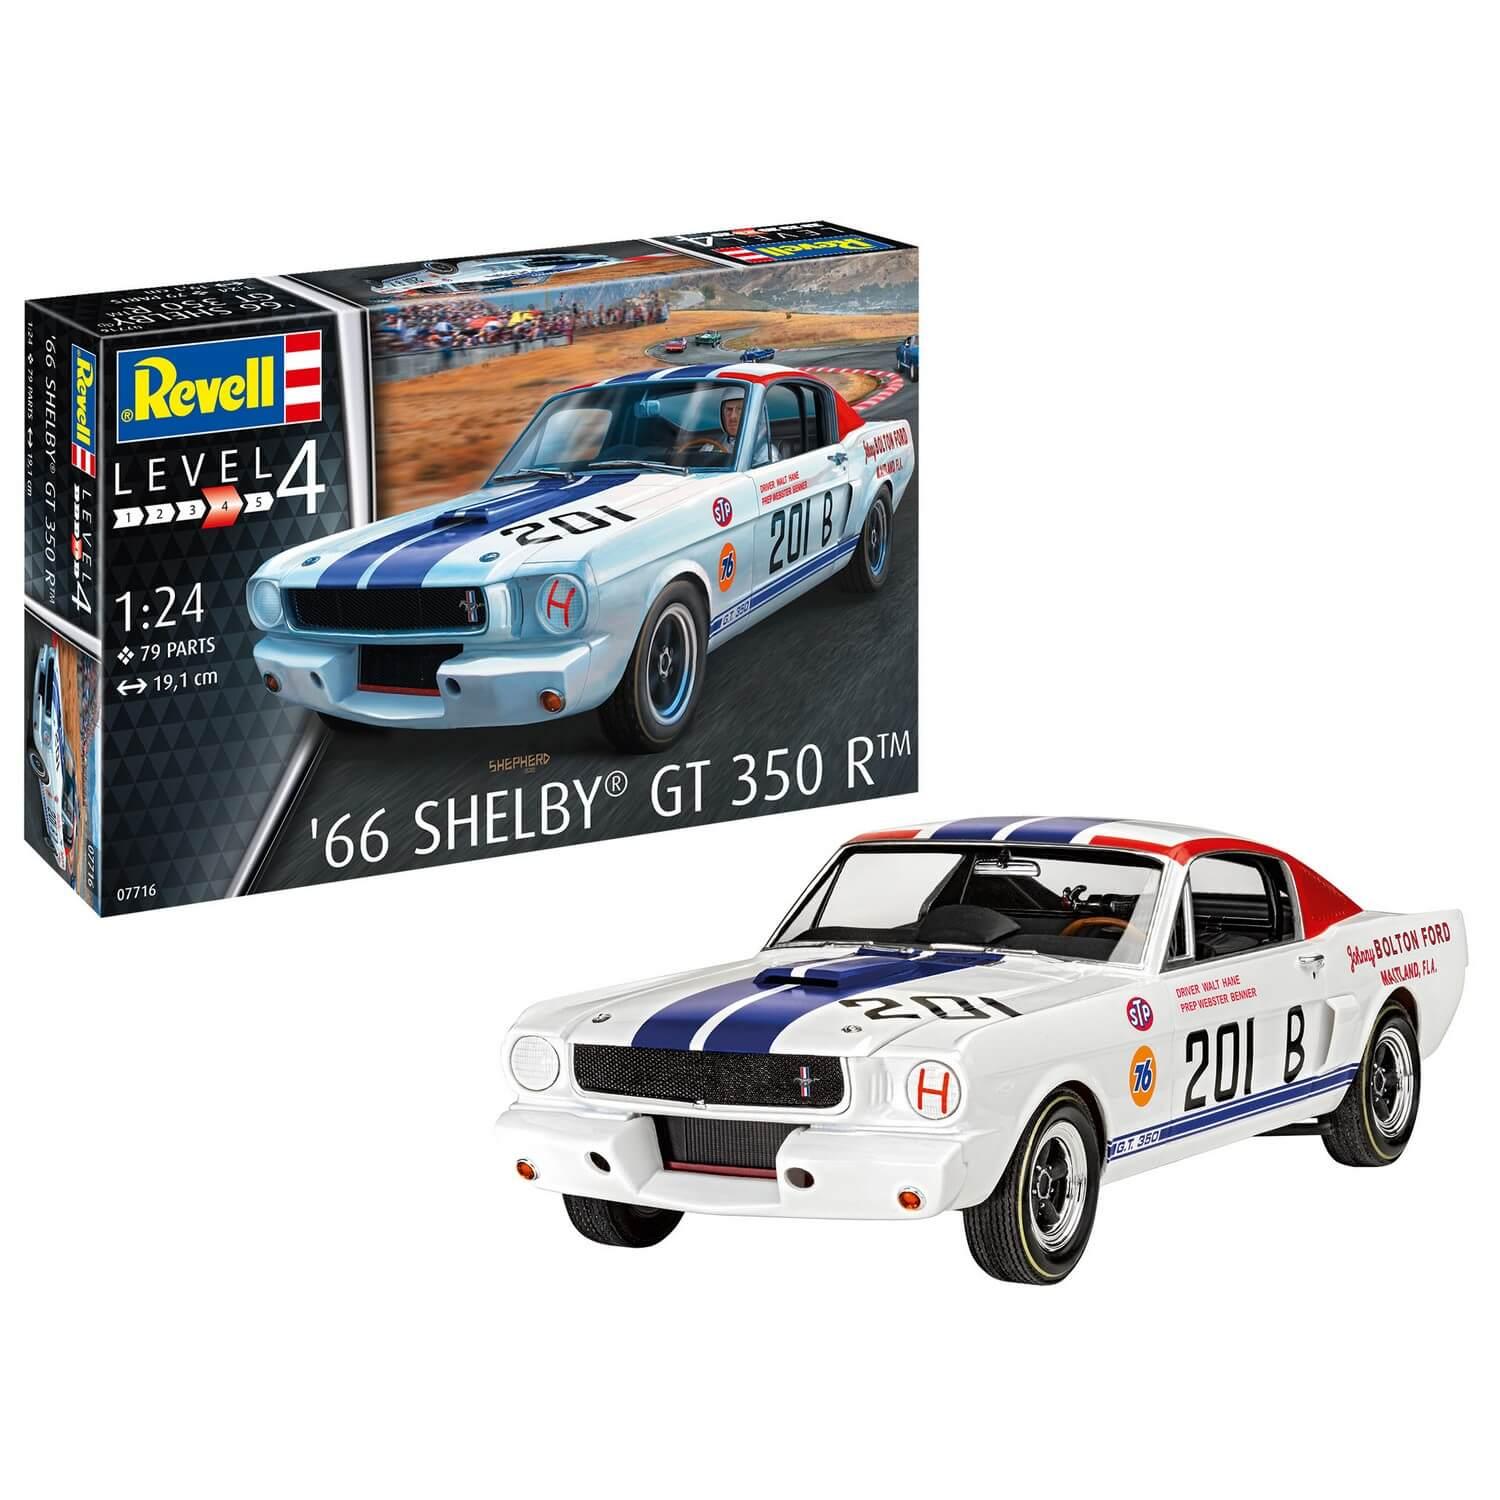 Maquette voiture : 1966 Shelby GT 350 R